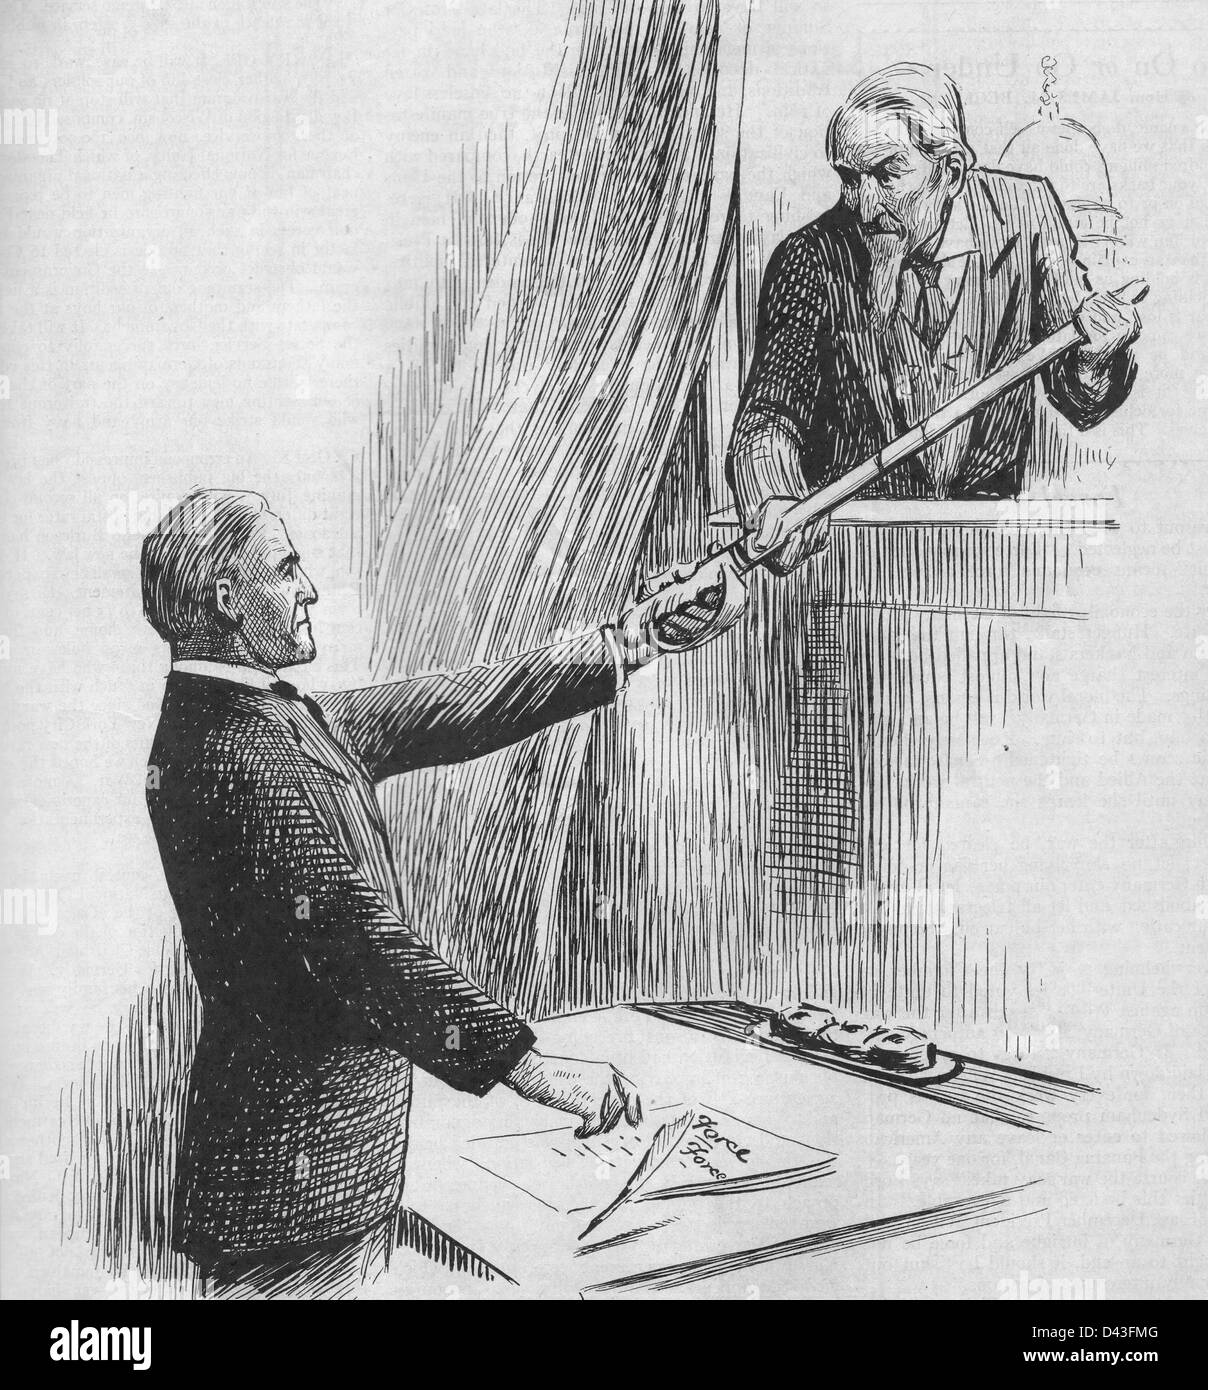 'Right Now, the Sword is mightier than the Pen' - WWI poster showing lawmaker handing sword to Uncle Sam to prosecute the war Stock Photo